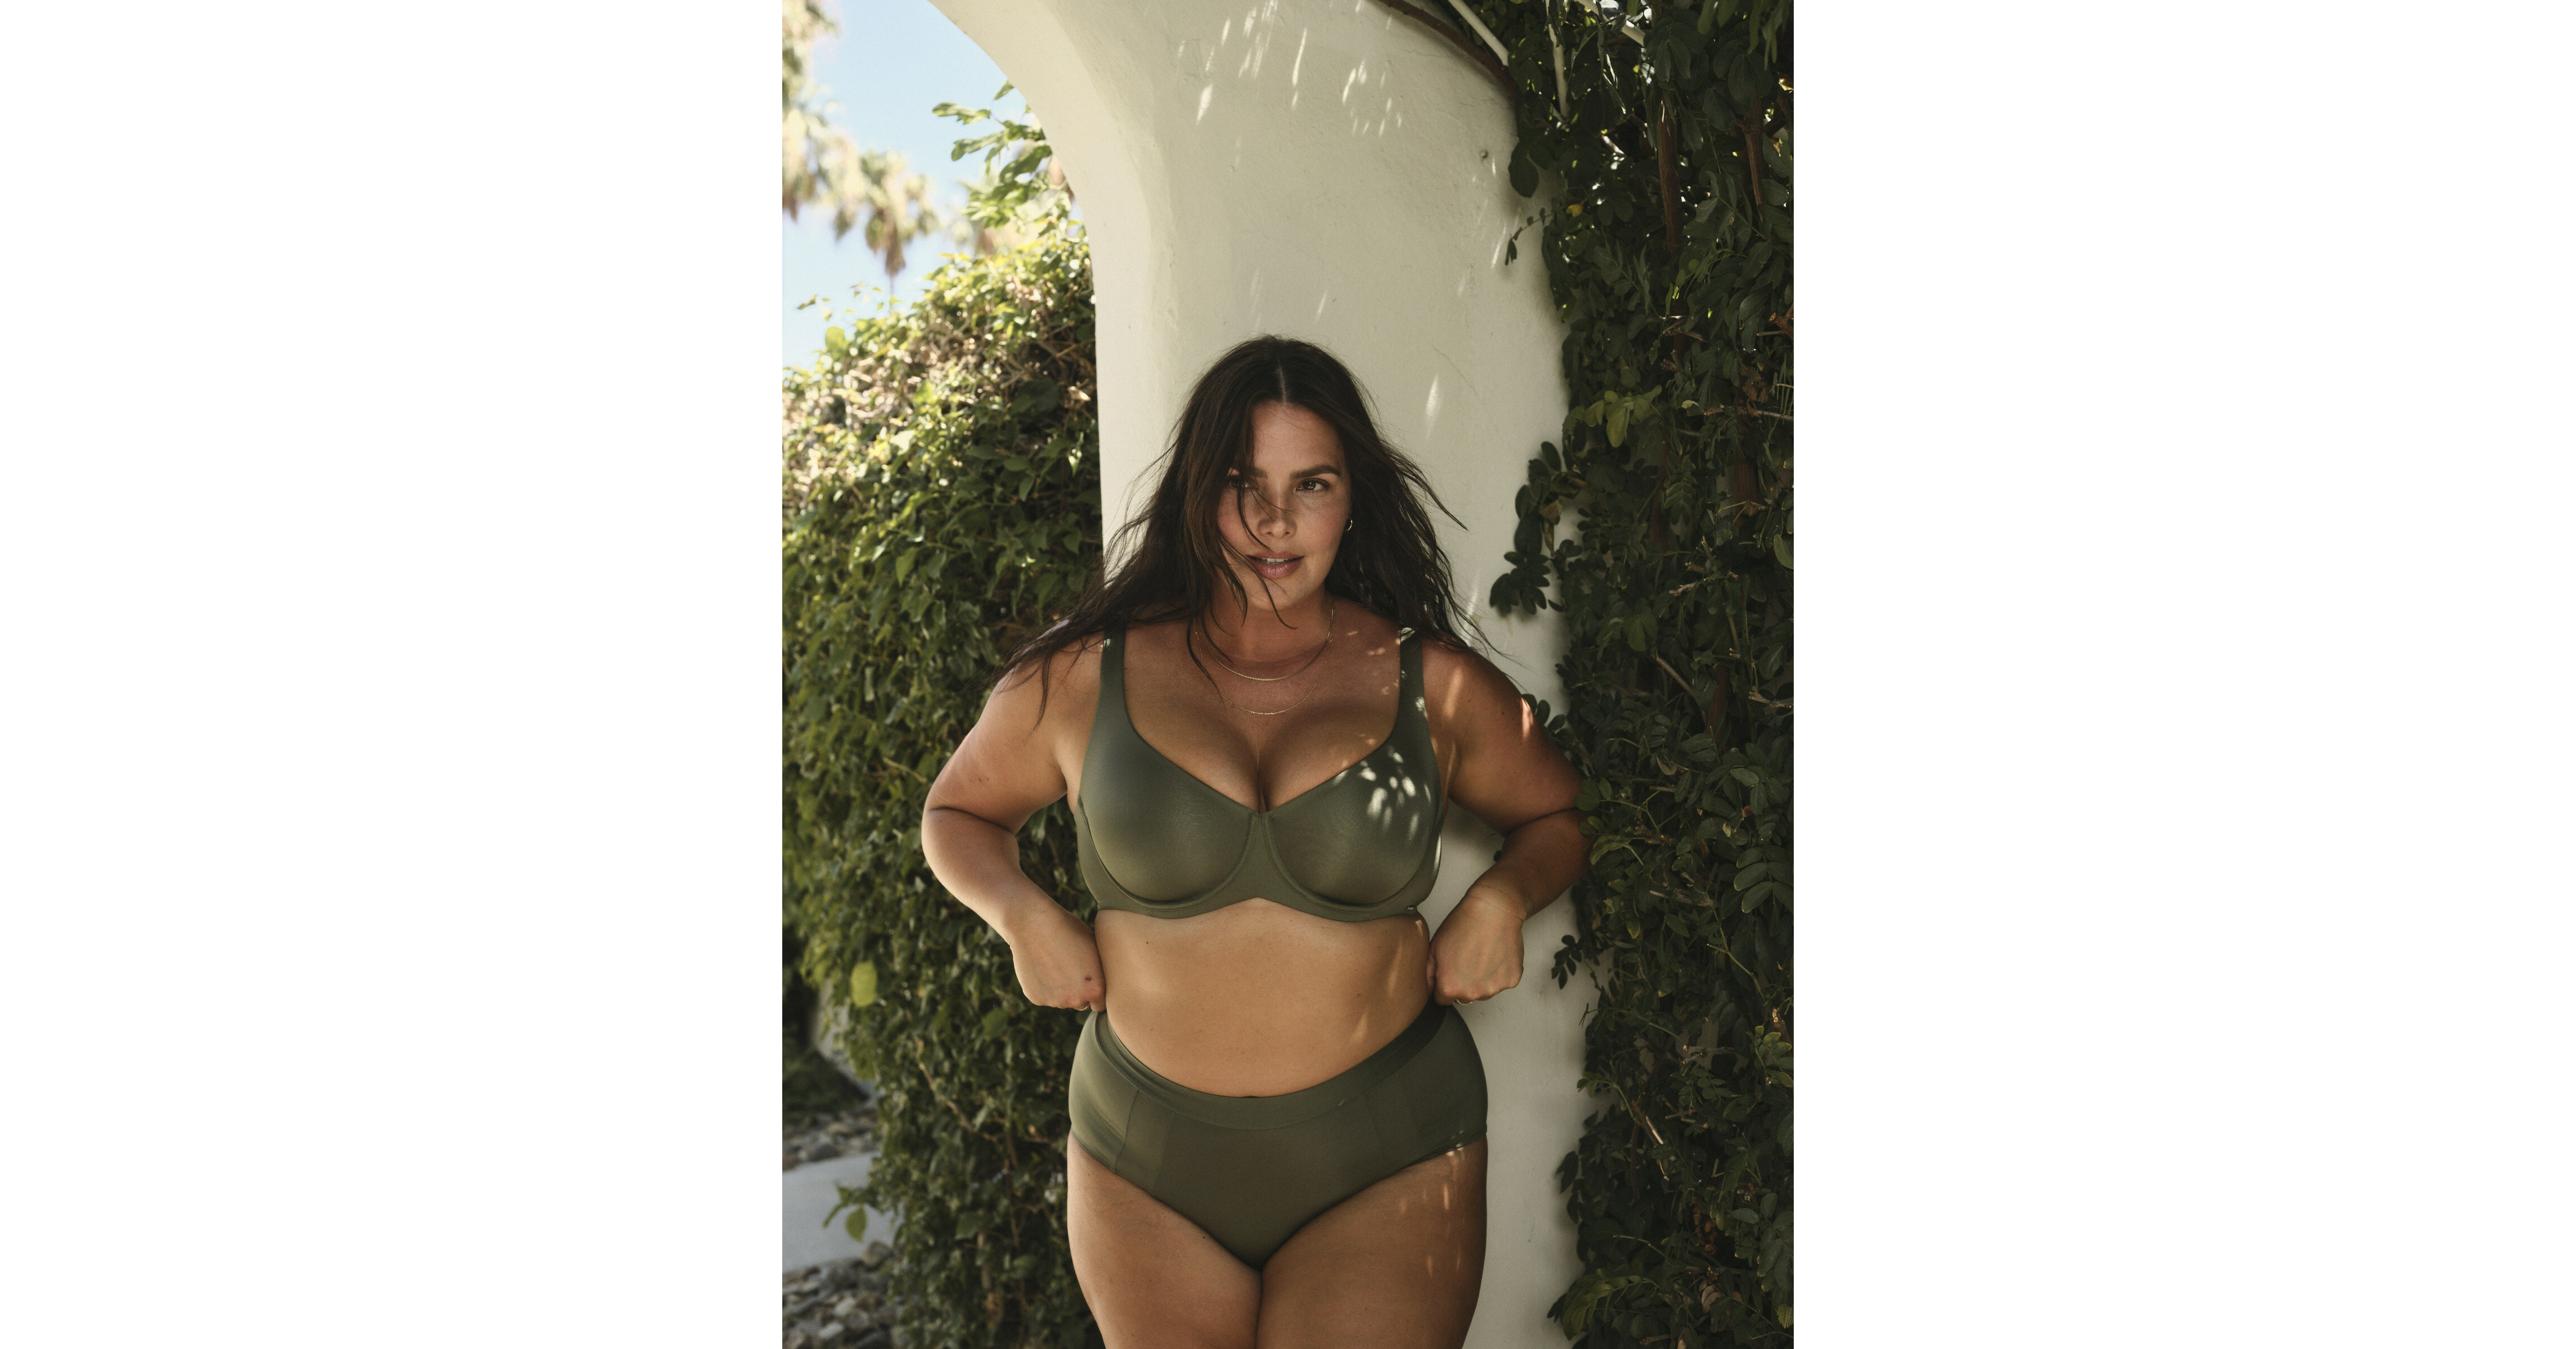 BEAT THE AUGUST HEAT WITH THESE NEW CANDICE HUFFINE-APPROVED BRAS FROM  LUVLETTE